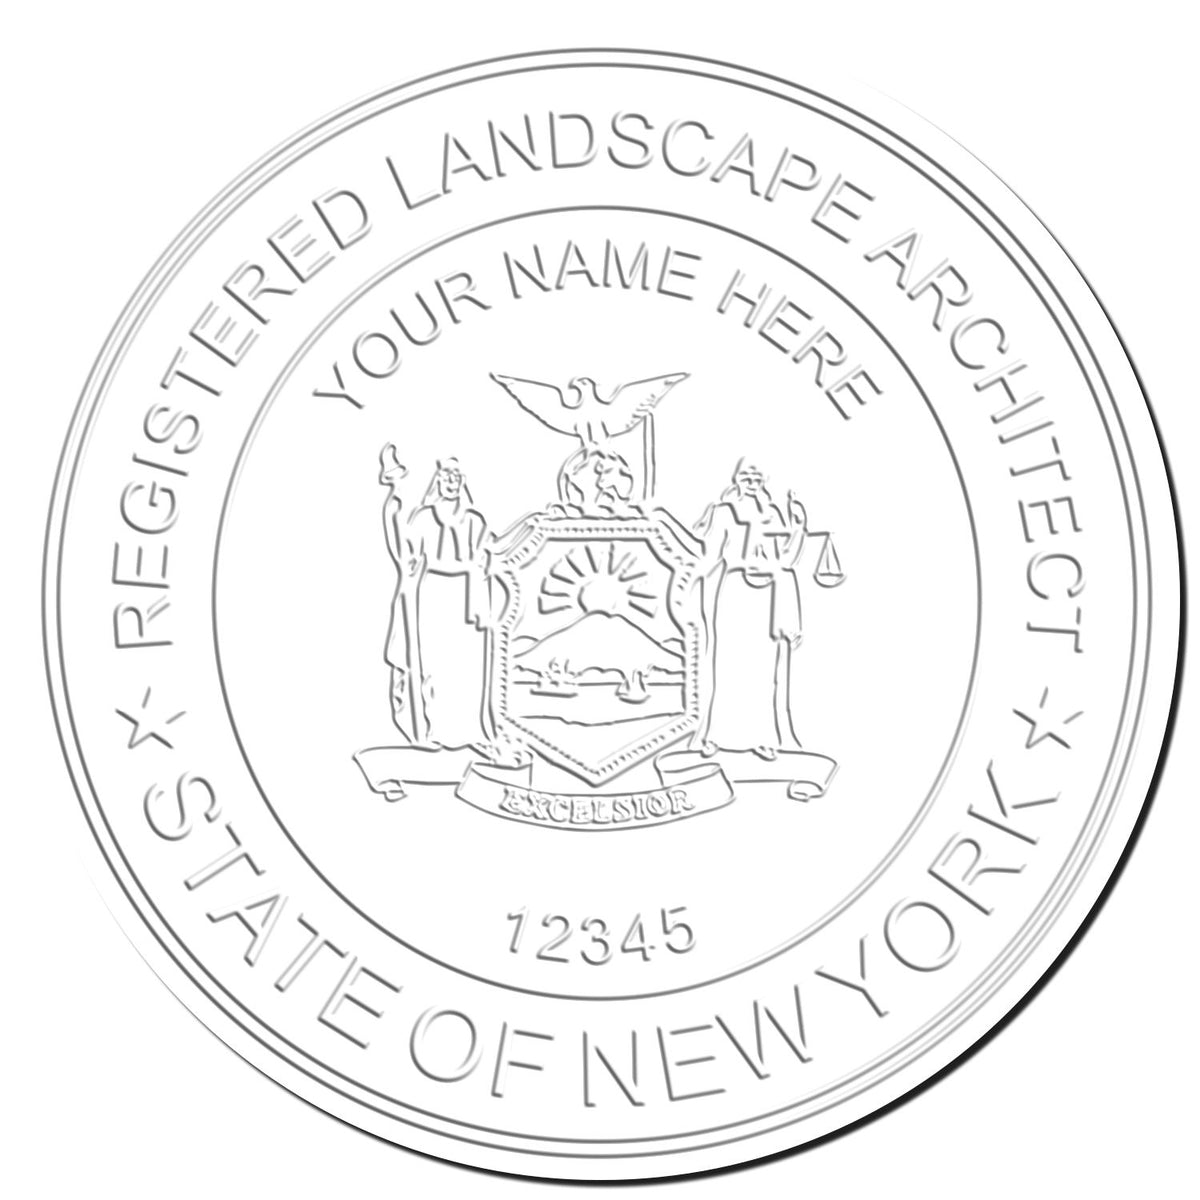 This paper is stamped with a sample imprint of the Gift New York Landscape Architect Seal, signifying its quality and reliability.